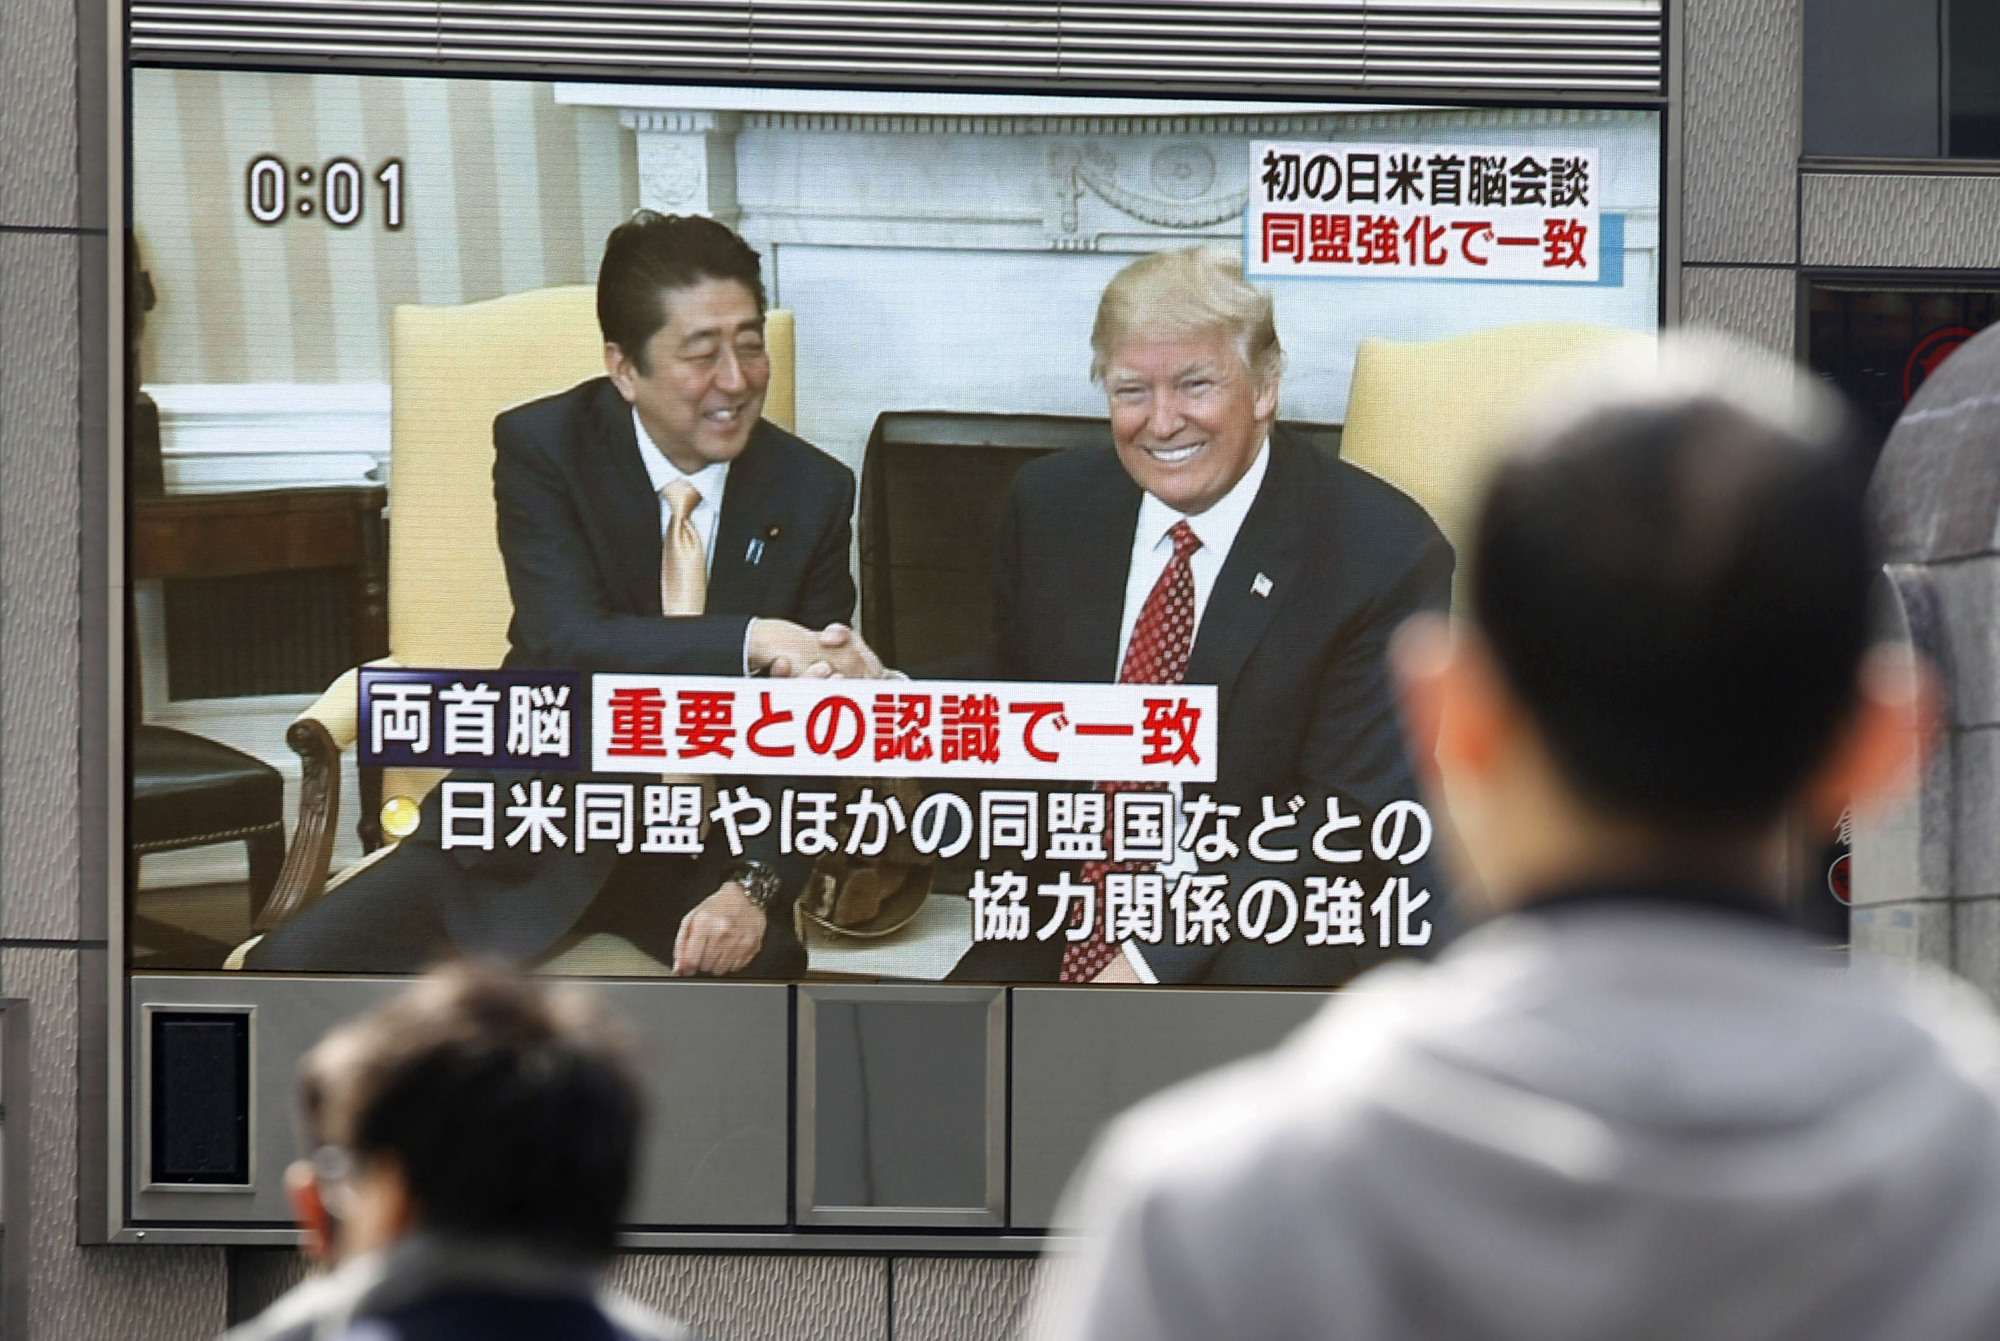 A big screen set up in the Dotonbori shopping district in the city of Osaka shows the meeting Saturday between Prime Minister Shinzo Abe and U.S. President Donald Trump. | KYODO